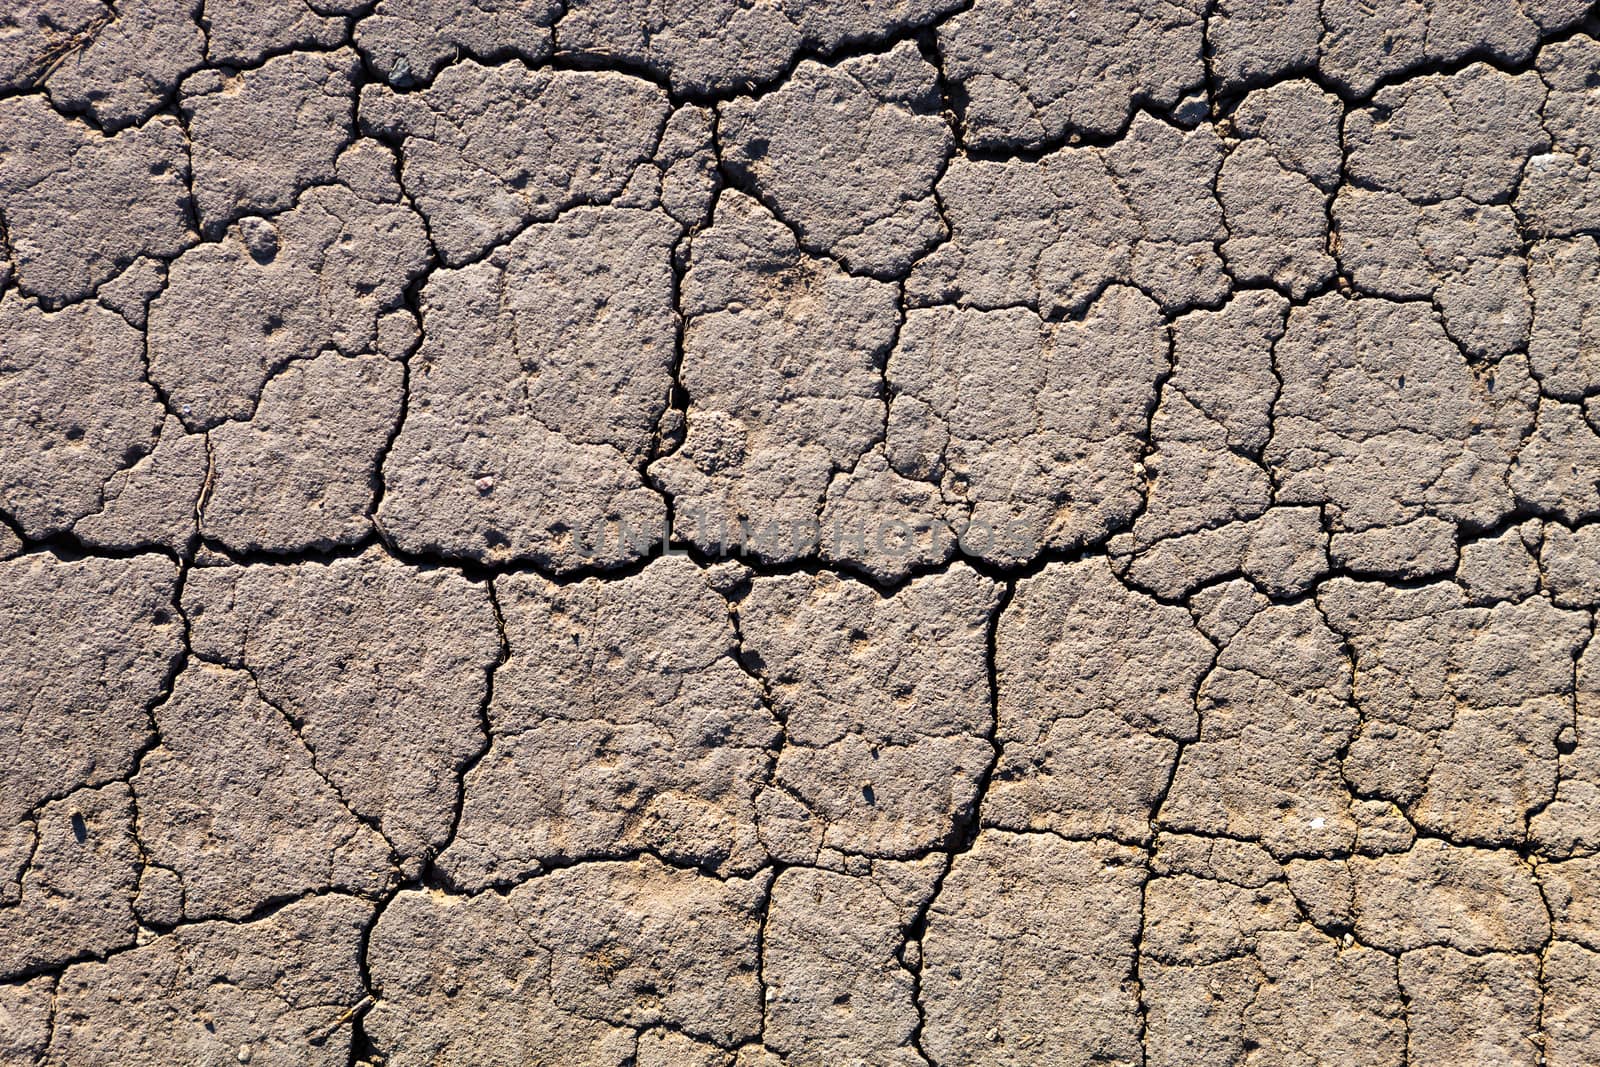 Cracked dry ground by rootstocks